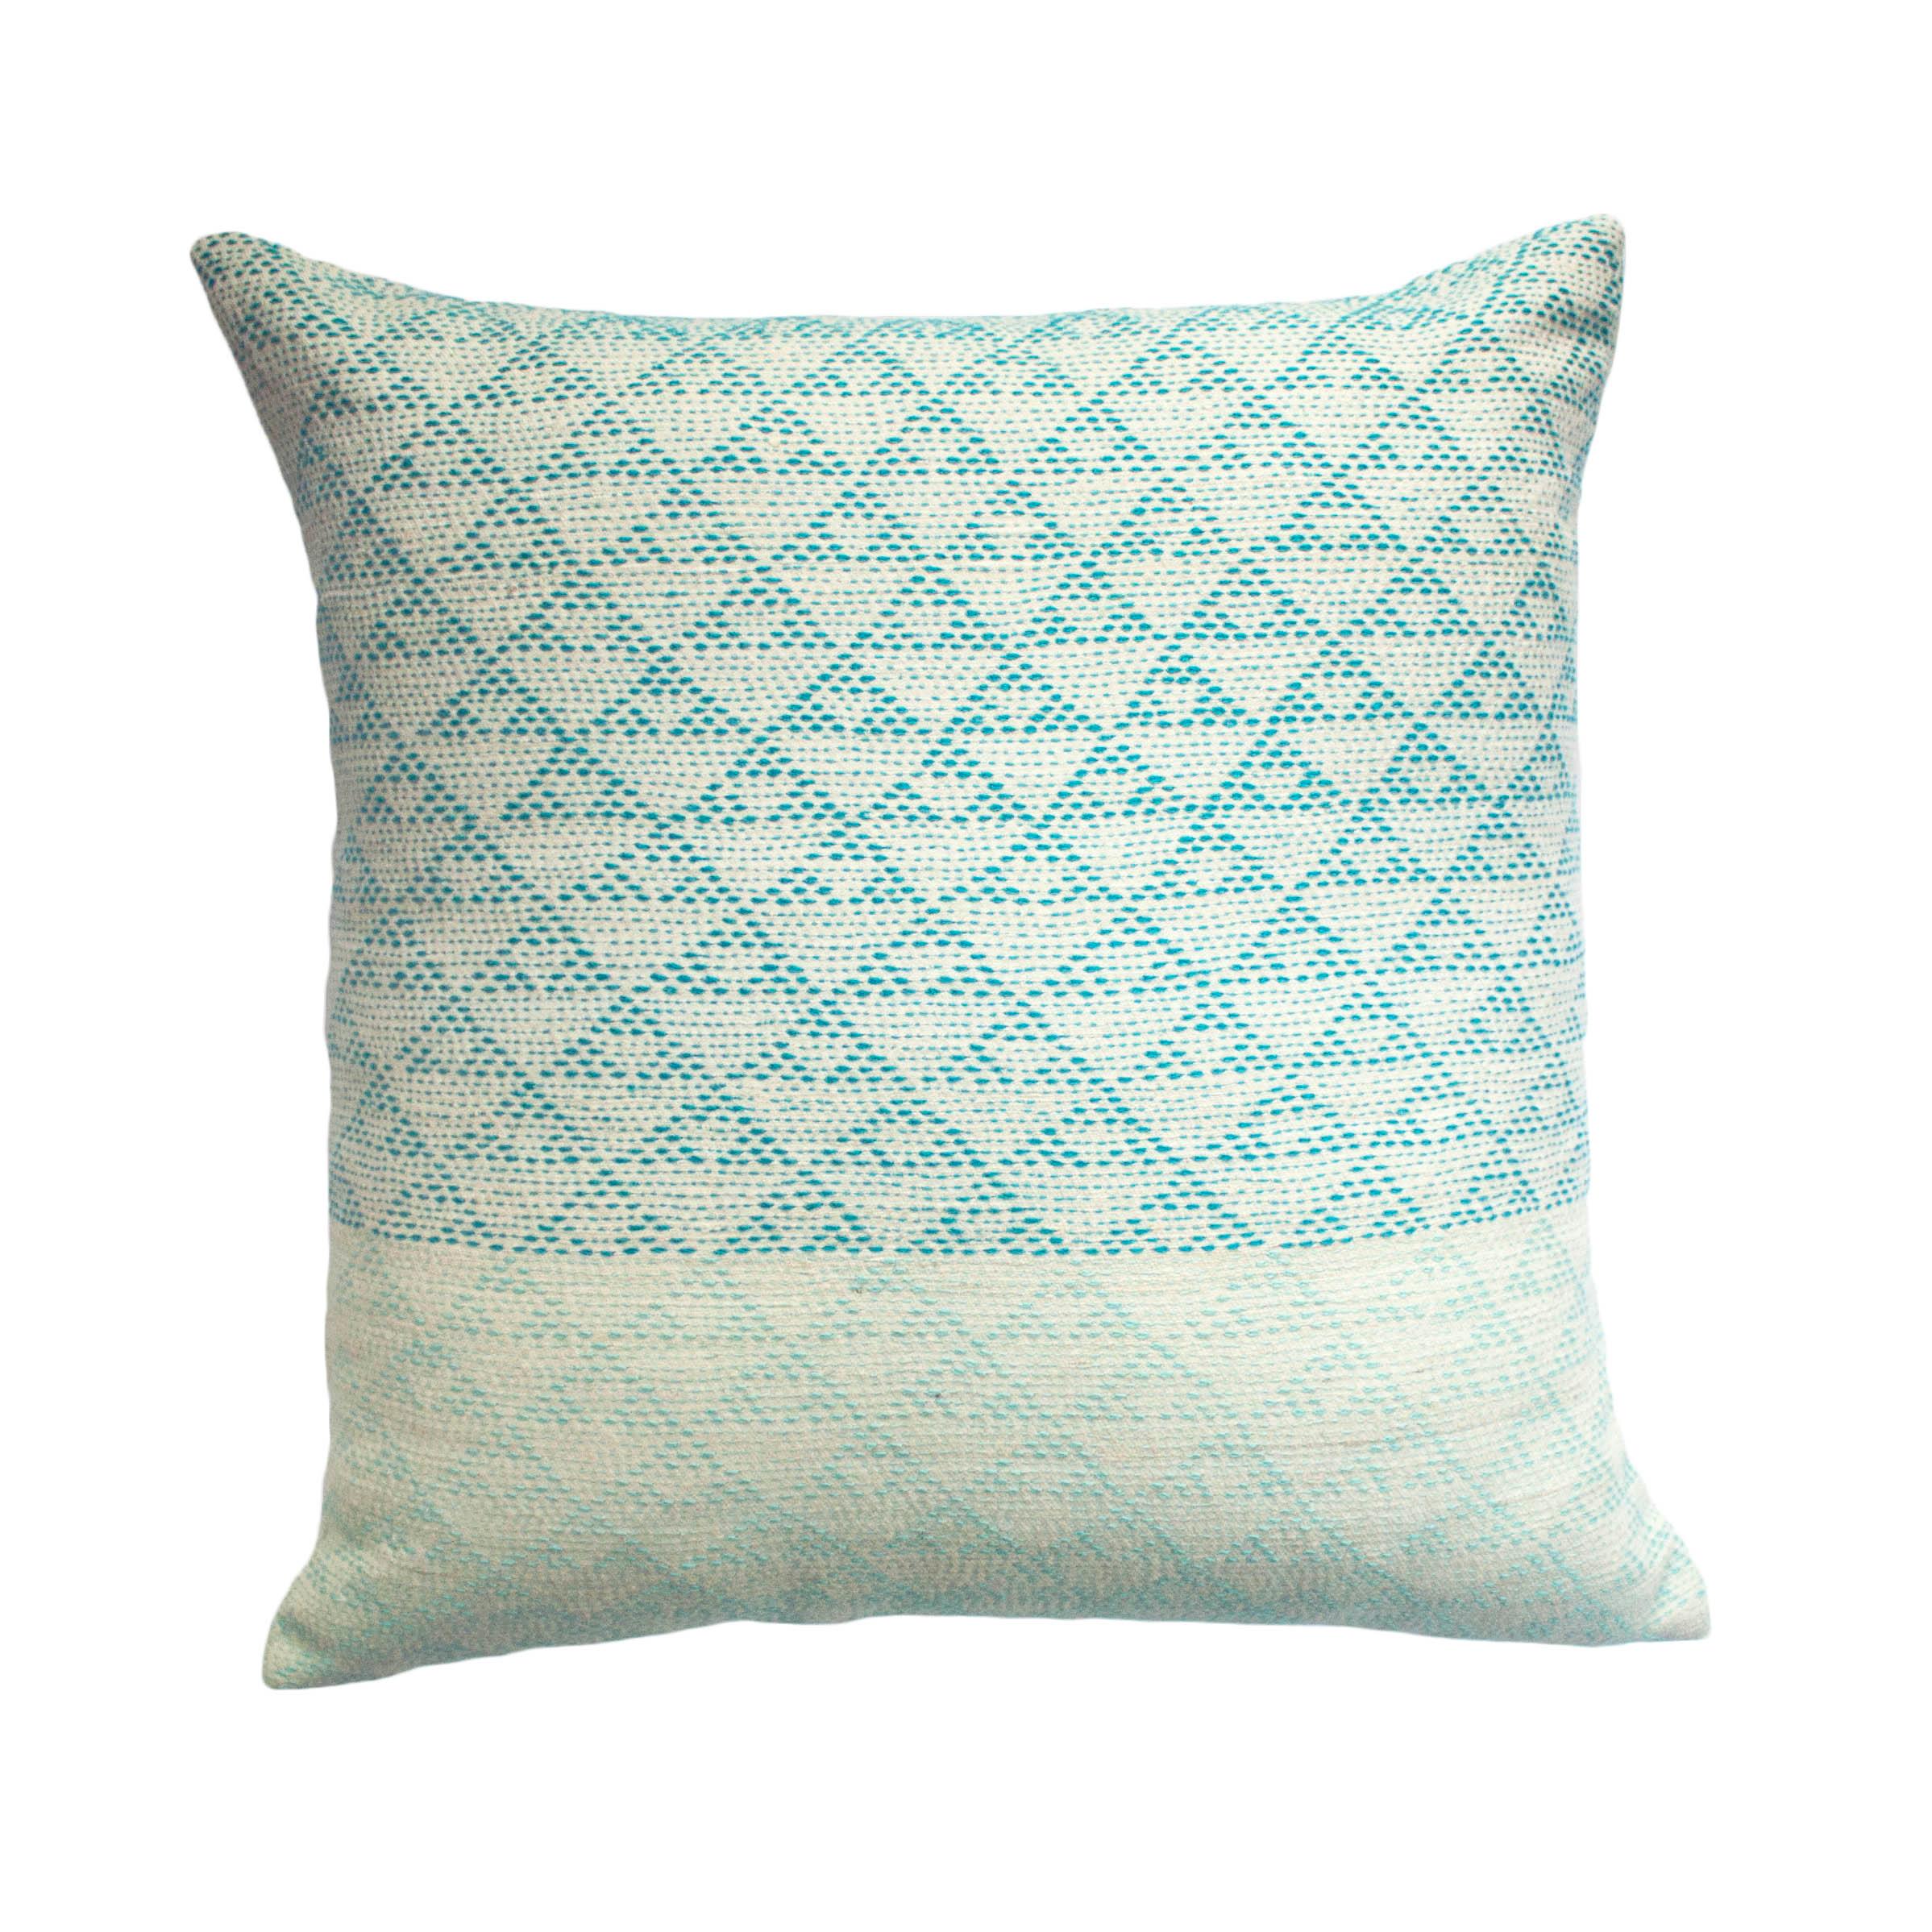 Eva Ivory & Turquoise Hand Embroidered Modern Geometric Throw Pillow Cover